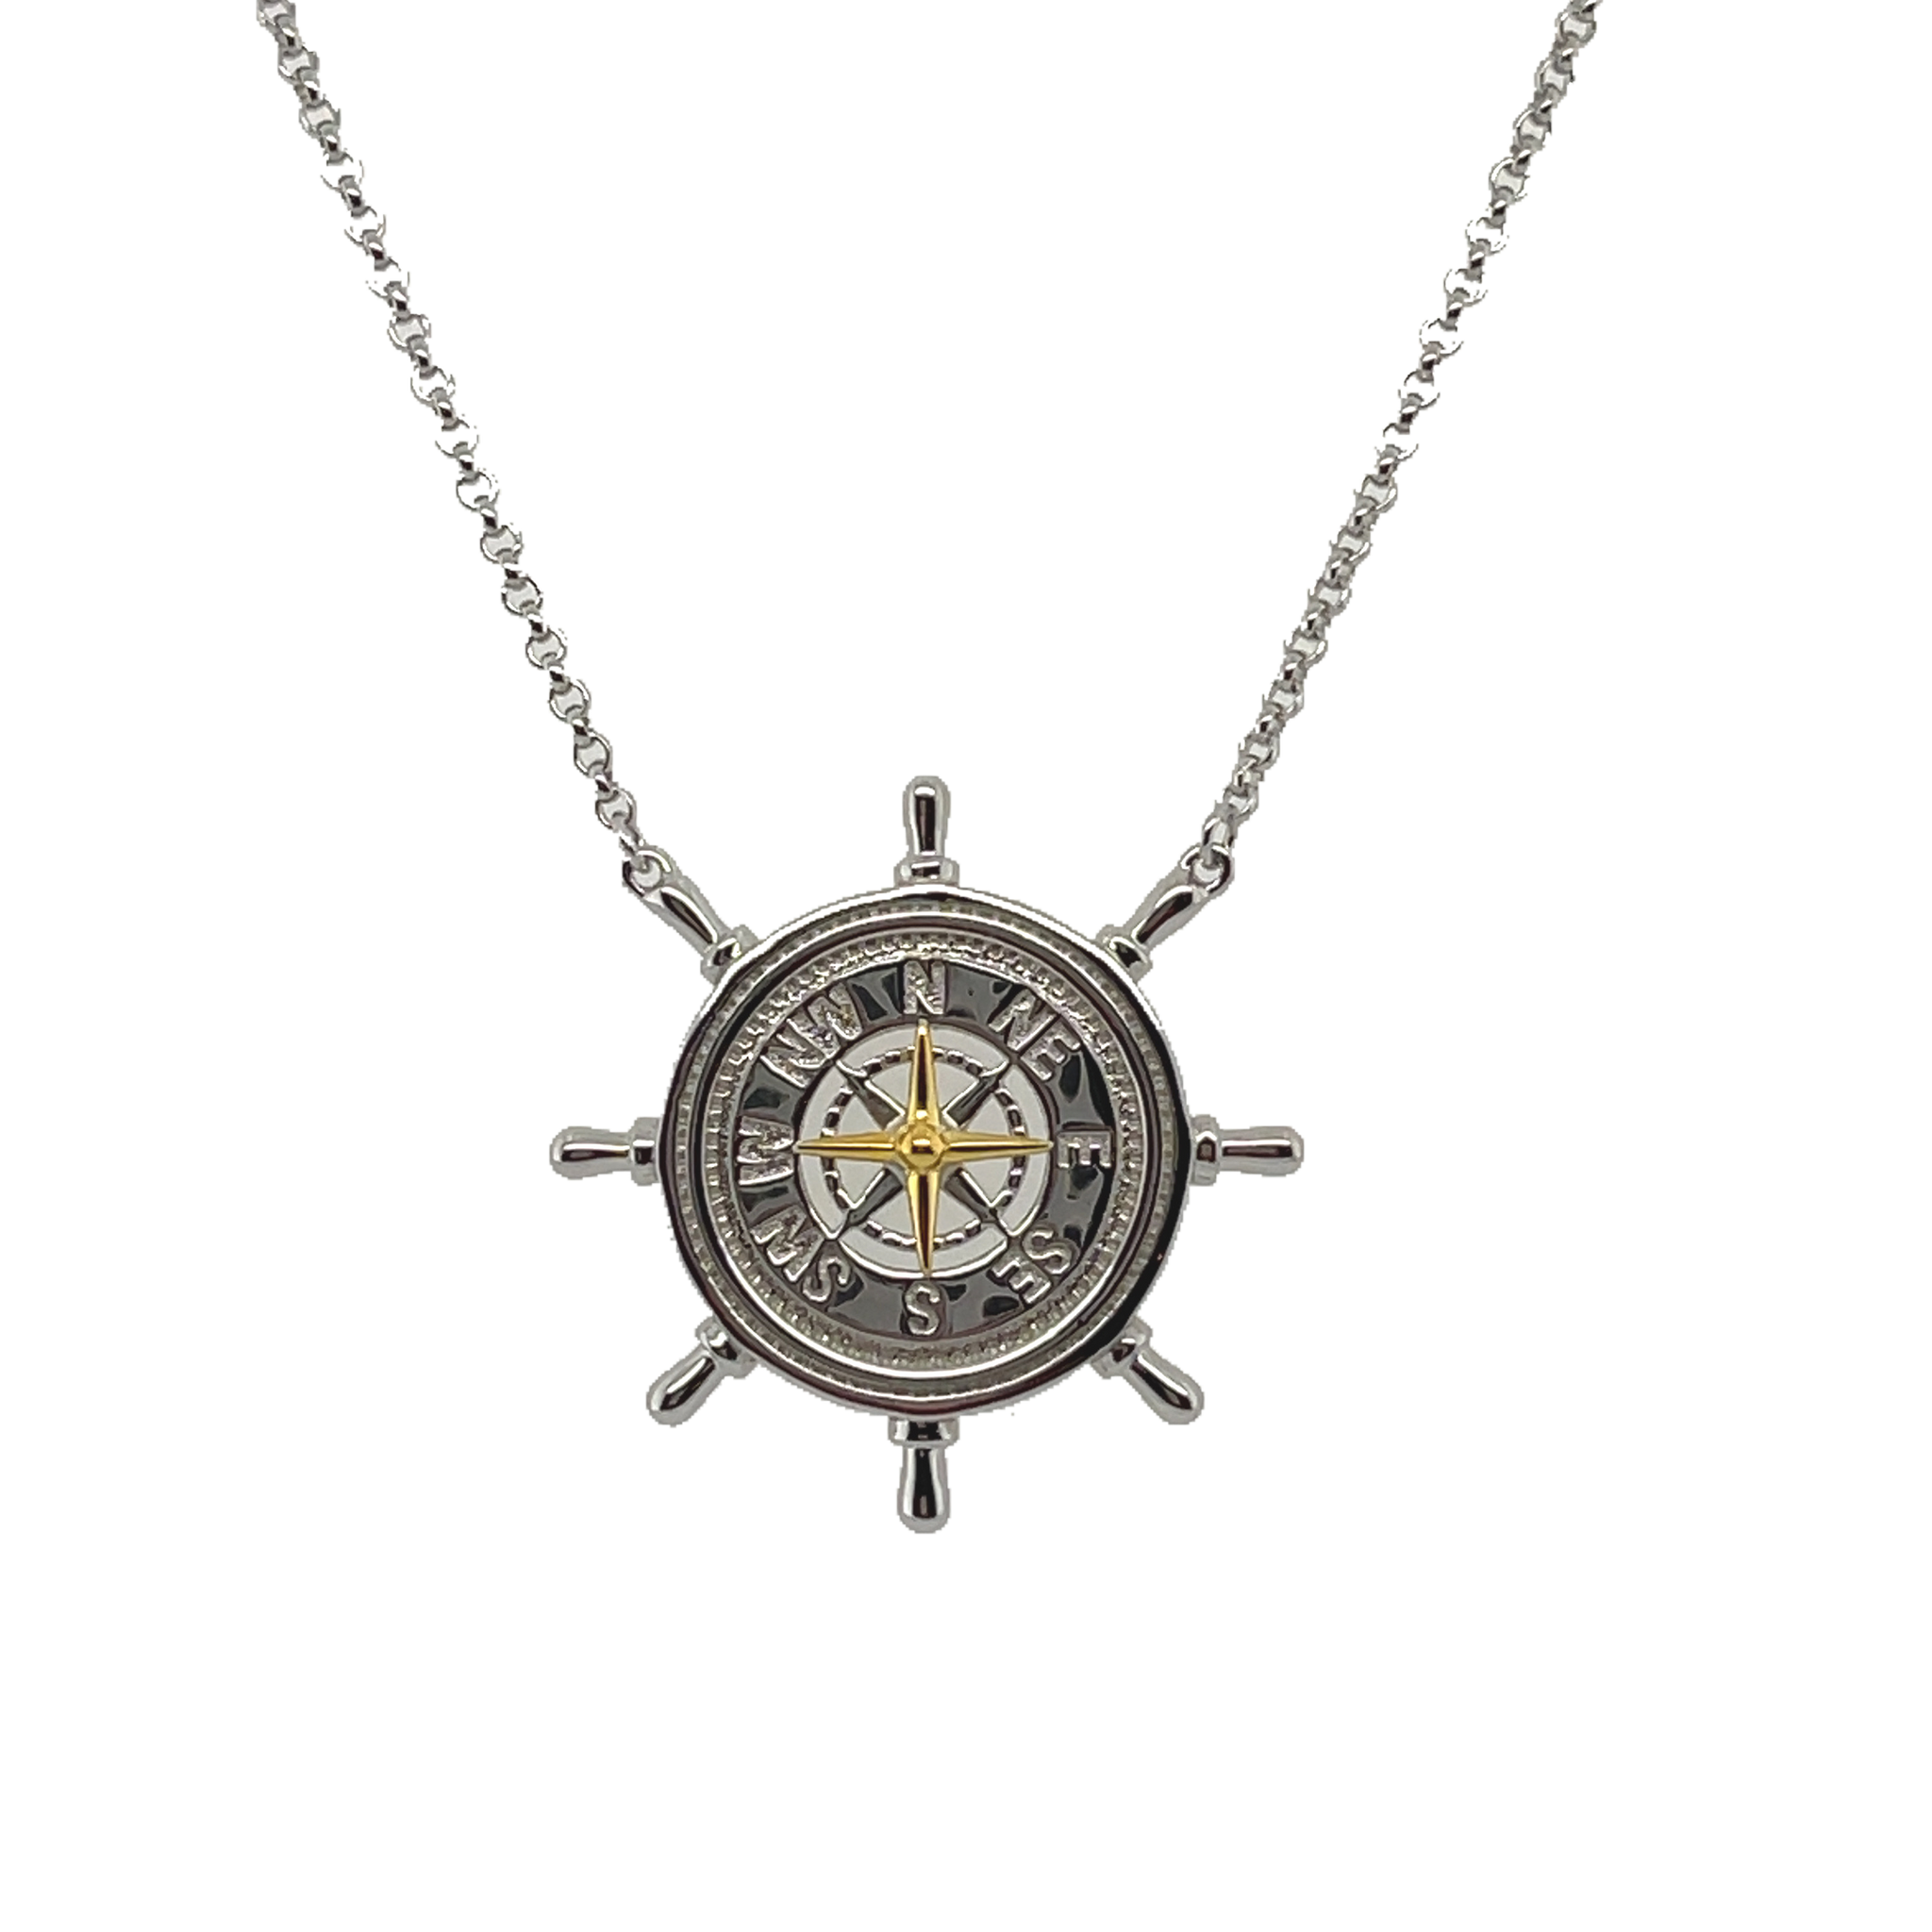 Ships Wheel/Compass Necklace